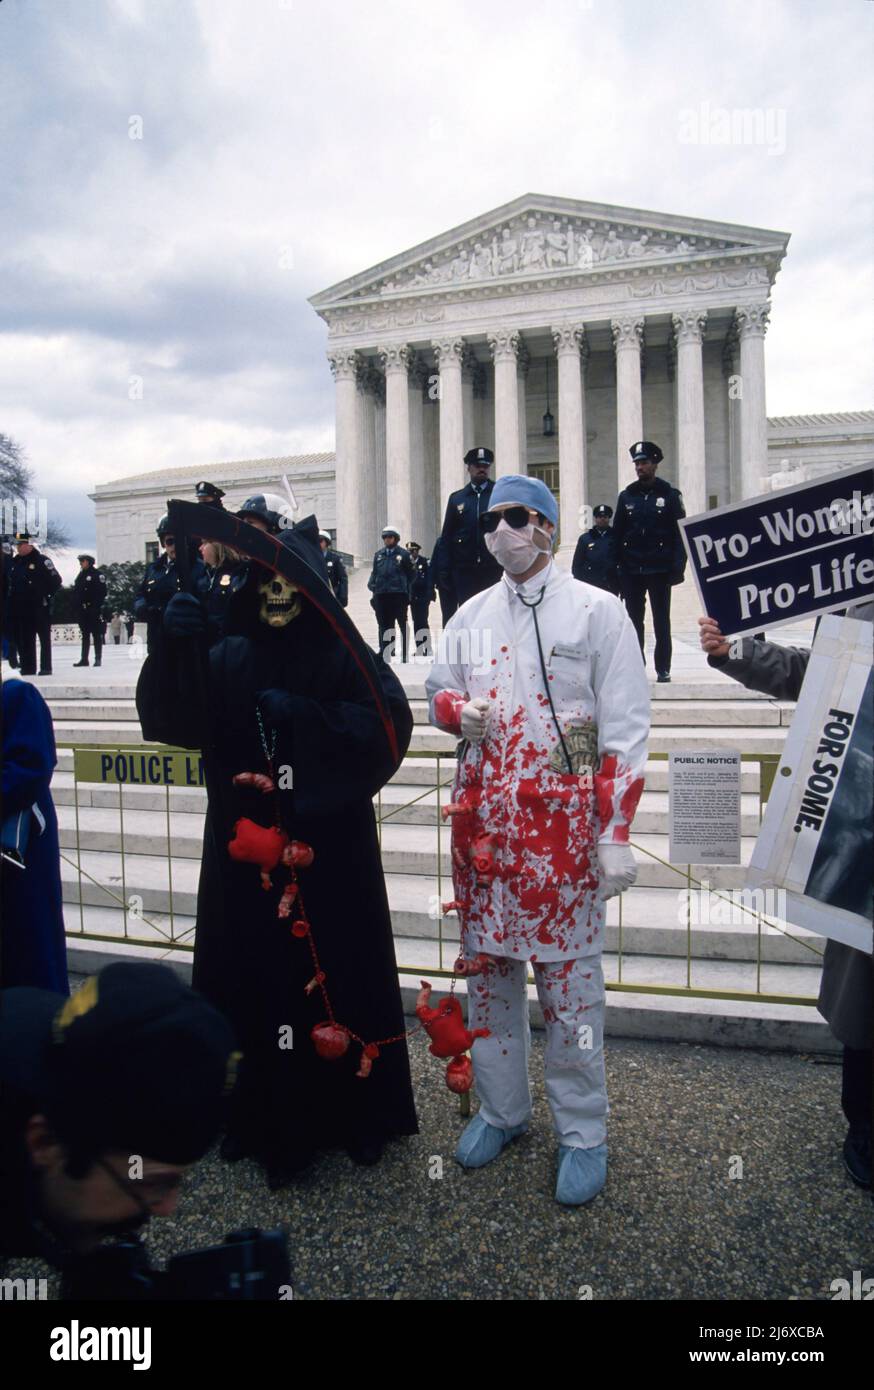 Pro Life activists march from the Ellipse to the Supreme Court January 23, 1995 in Washington, DC. The pro lifers were met with opposition groups in favor of abortion. Stock Photo